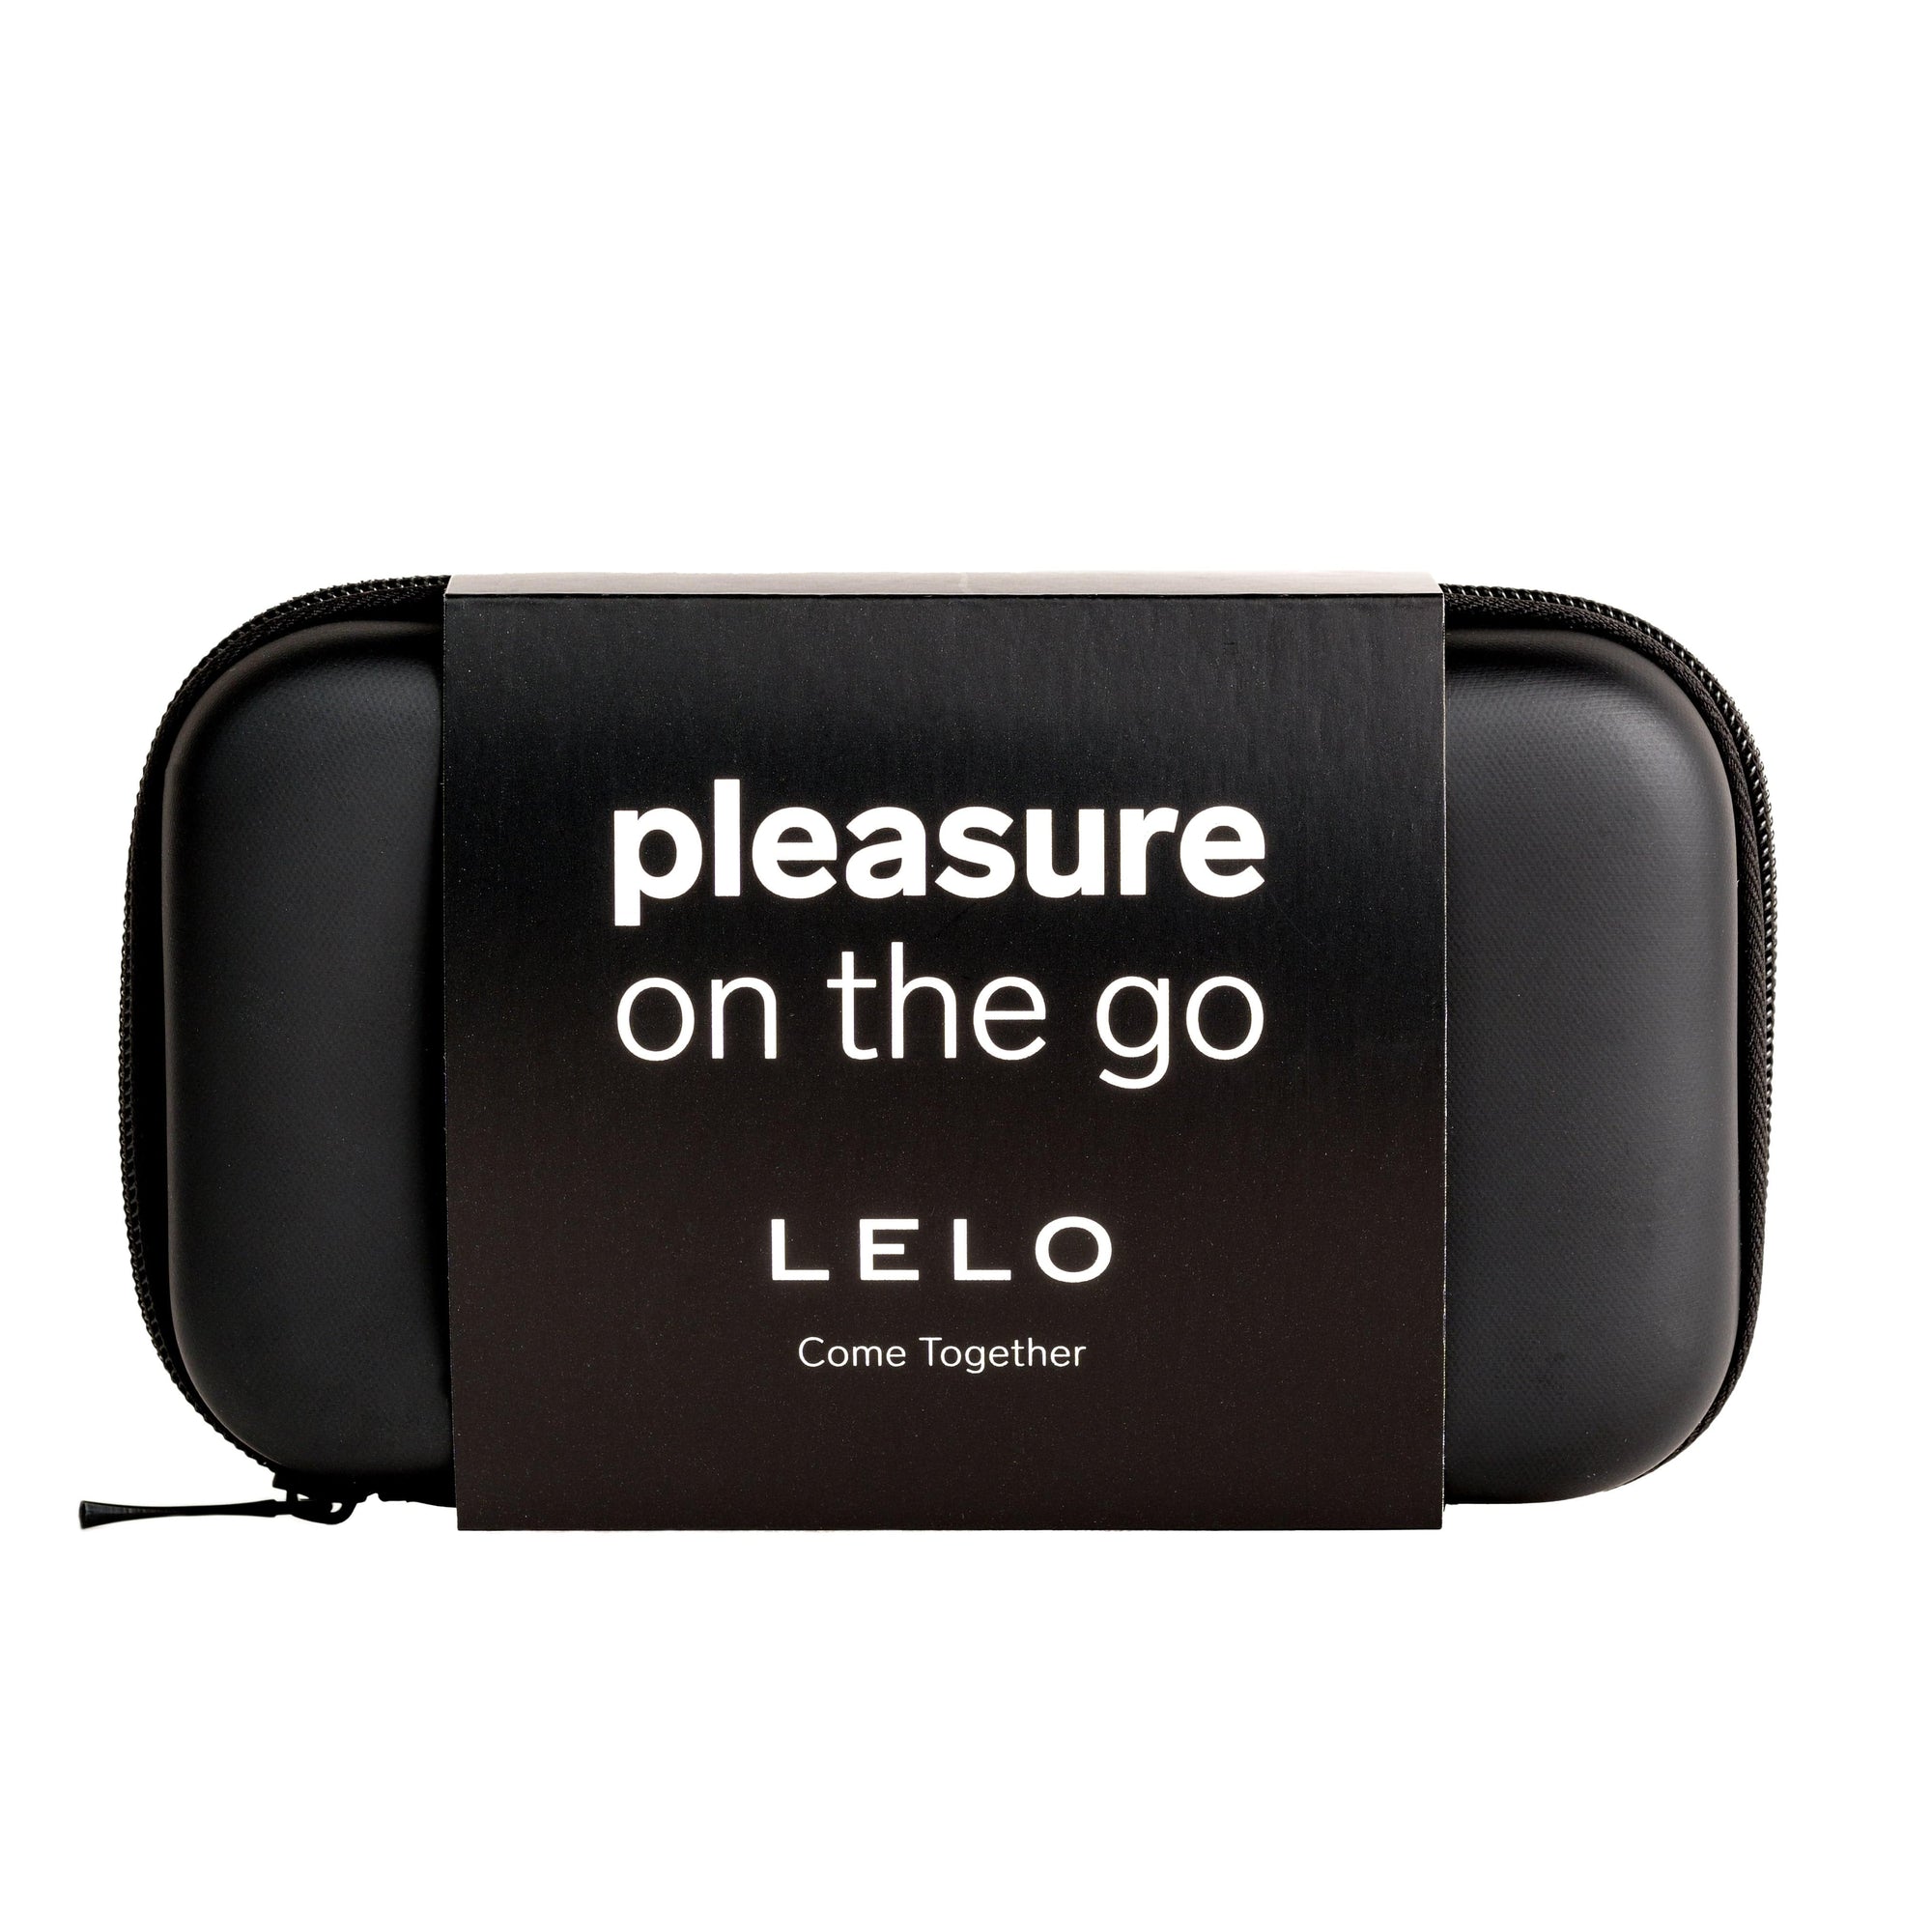 LELO - Pleasure On The Go Kit B Sona 2 Sonic Clitoral Massager with Pleasure Enhancing Serum -  Clit Massager (Vibration) Rechargeable  Durio.sg